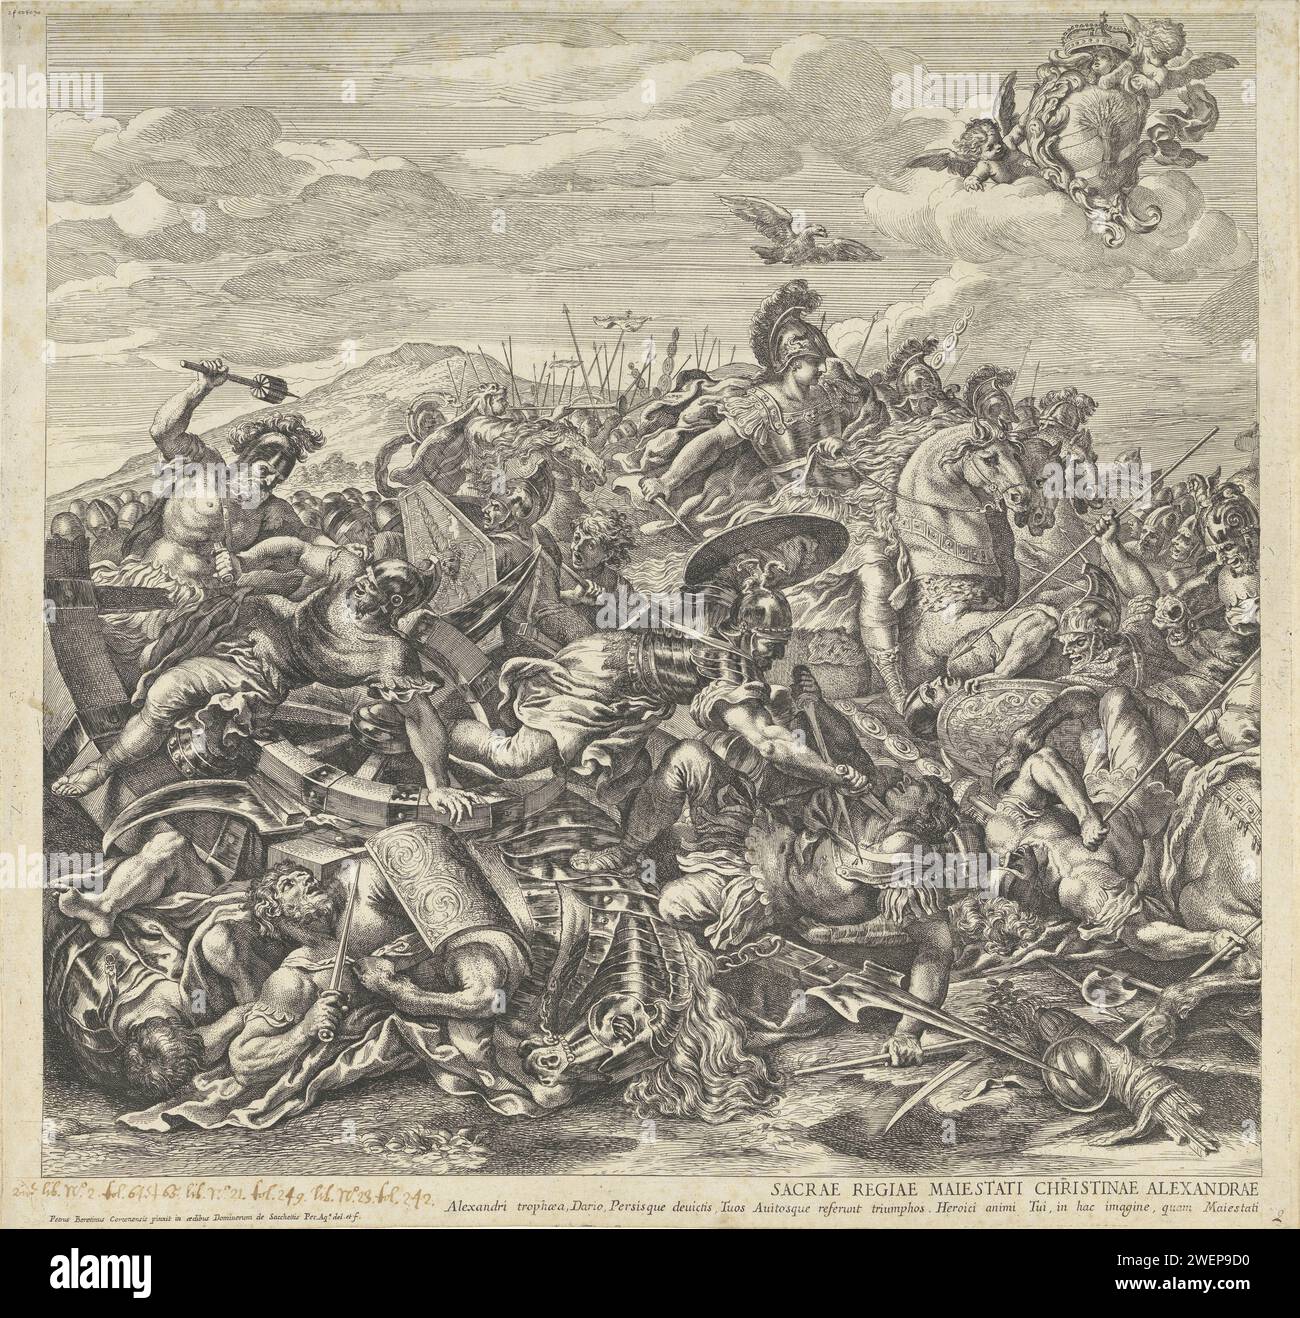 Battle of Arbella (left part), Pietro Aquila, after Pietro da Cortona, 1660 - 1692 print The battle between the armies of Alexander the Great and Darius at Arbella. At the top right putti with a coat of arms.  paper etching the soldier; the soldier's life. battle. fighting. warfare; military affairs (+ cavalry, horsemen). (story of) Alexander the Great. (story of) Darius, king of Persia Stock Photo